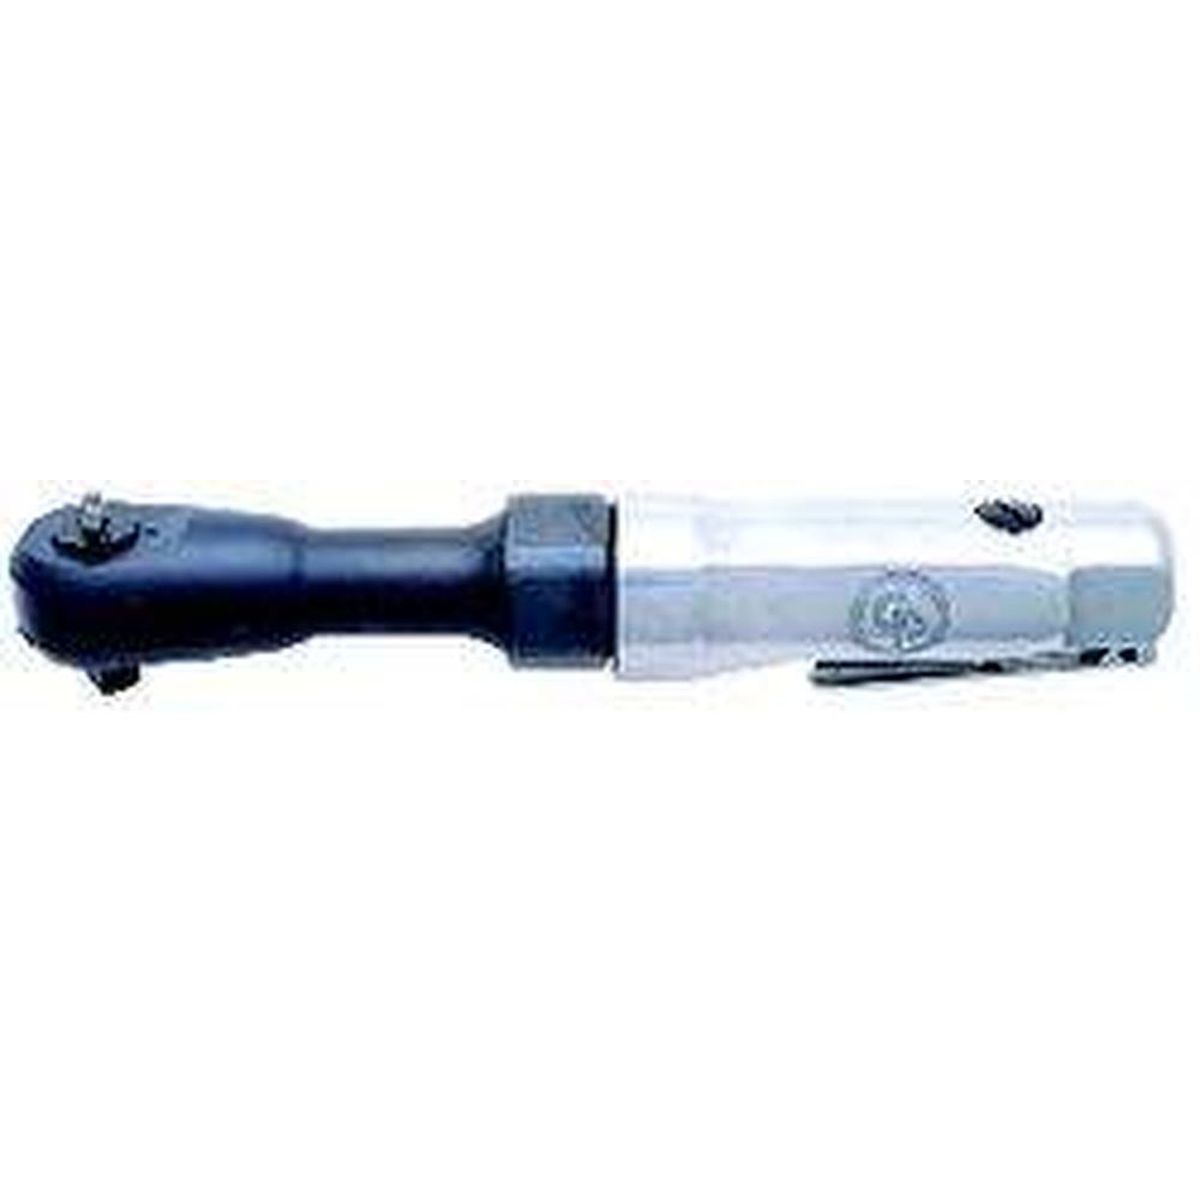 CP828 RATCHET WRENCH 3/8 700NM